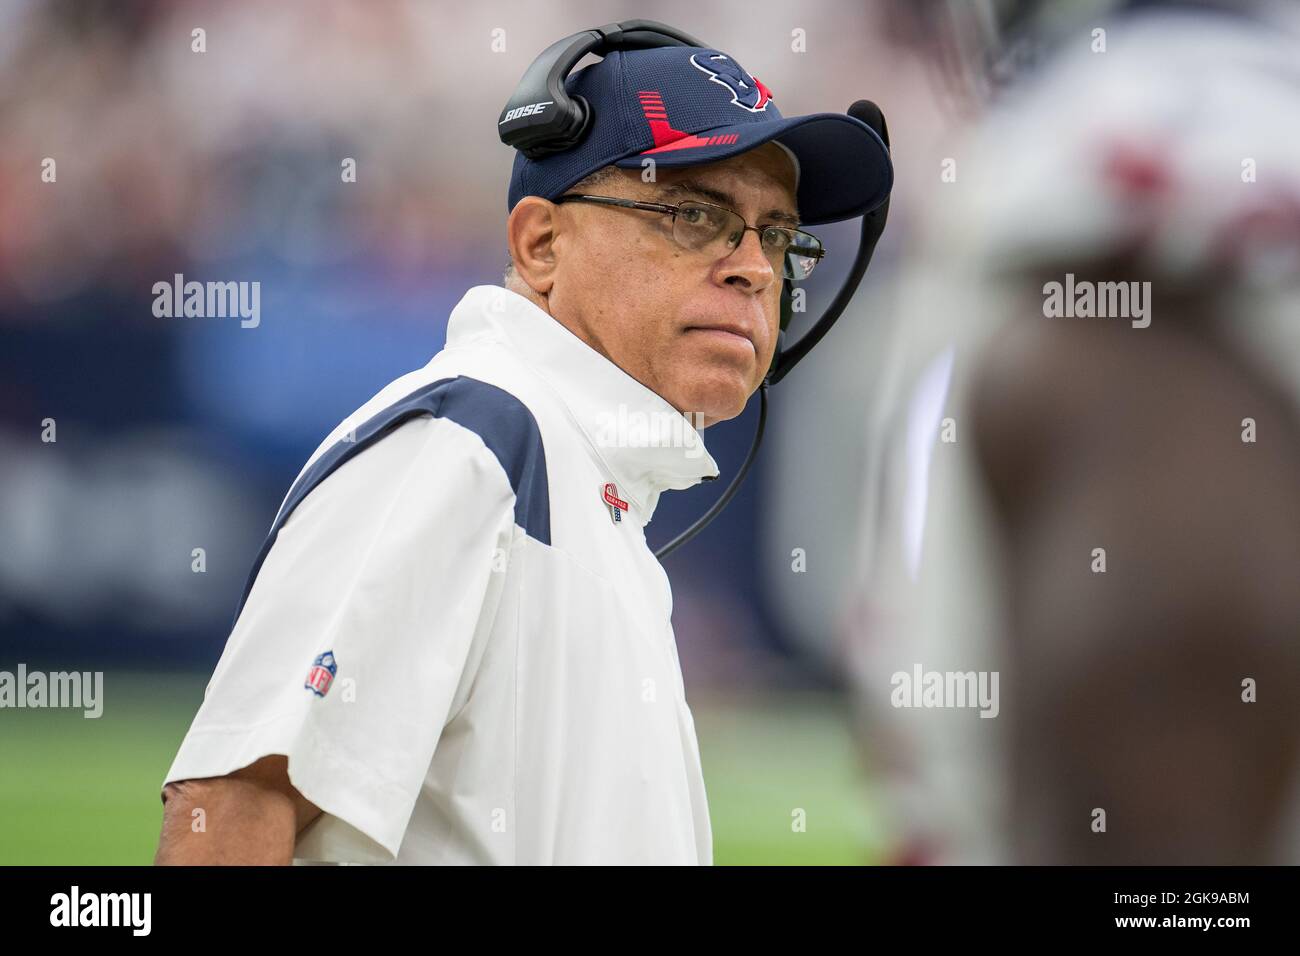 Houston, TX, USA. 12th Sep, 2021. Houston Texans head coach David Culley  during the 3rd quarter of an NFL football game between the Jacksonville  Jaguars and the Houston Texans at NRG Stadium